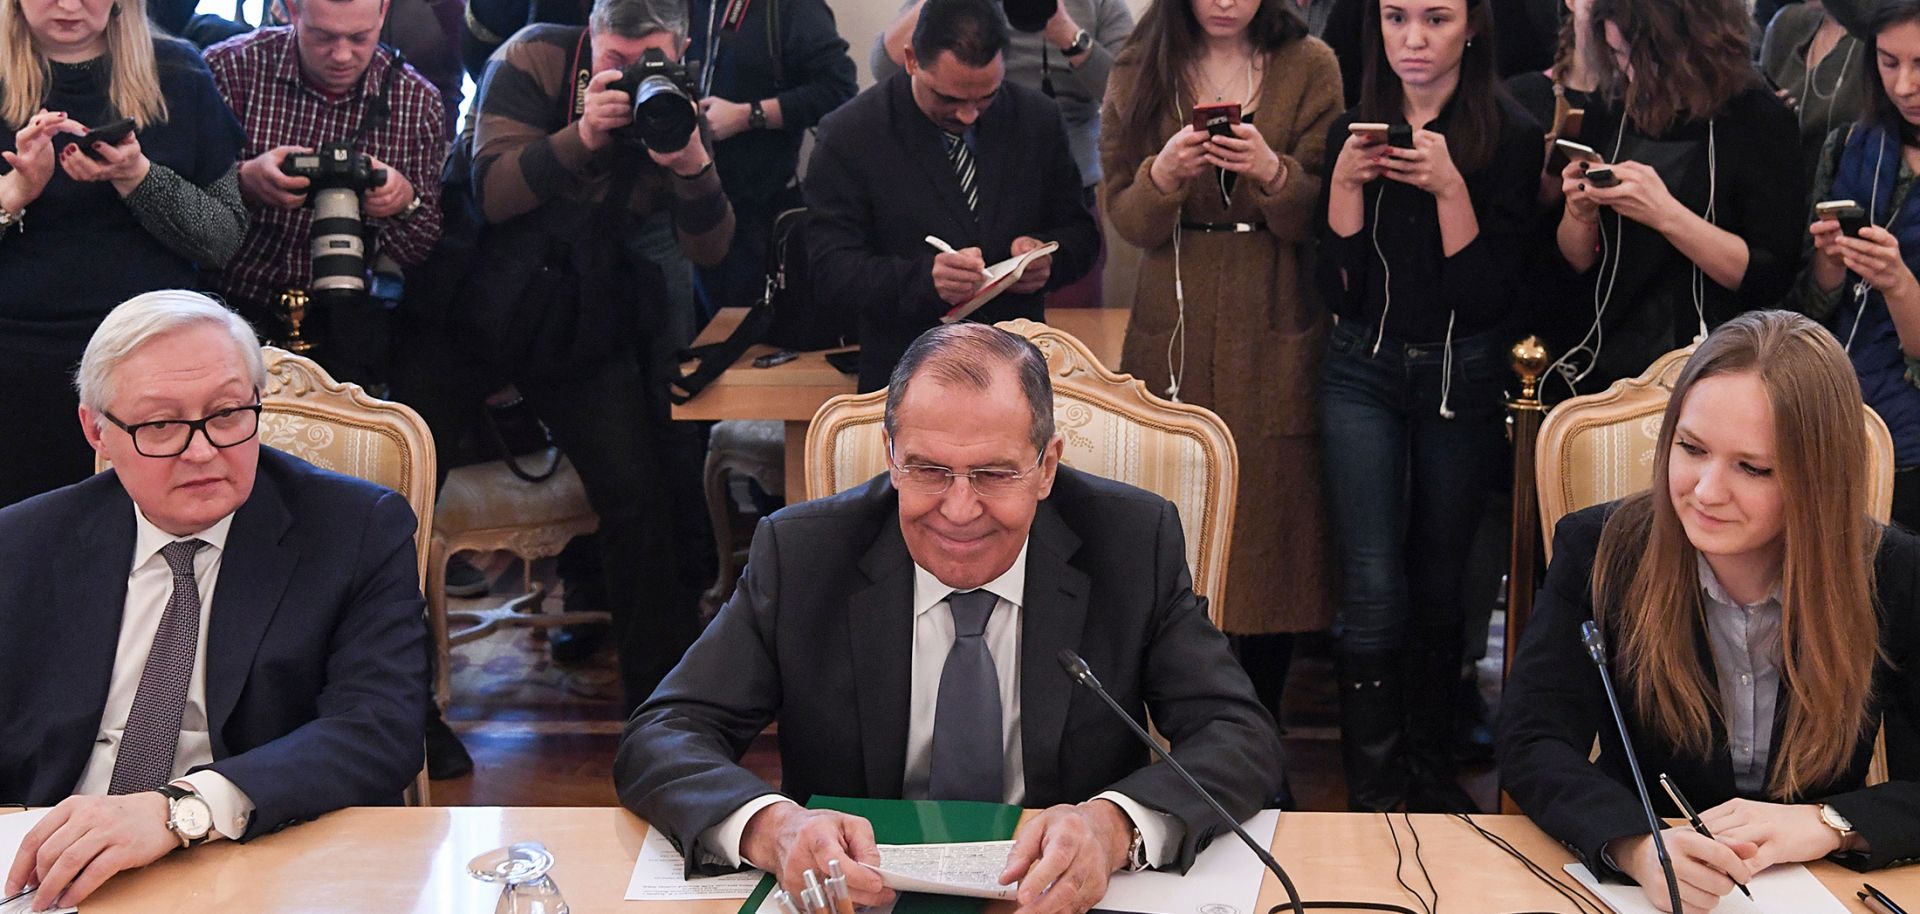 Russian Foreign Minister Sergei Lavrov looks on during a meeting with Venezuelan Vice President Delcy Rodriguez (unpictured) in Moscow on March 1, 2019.